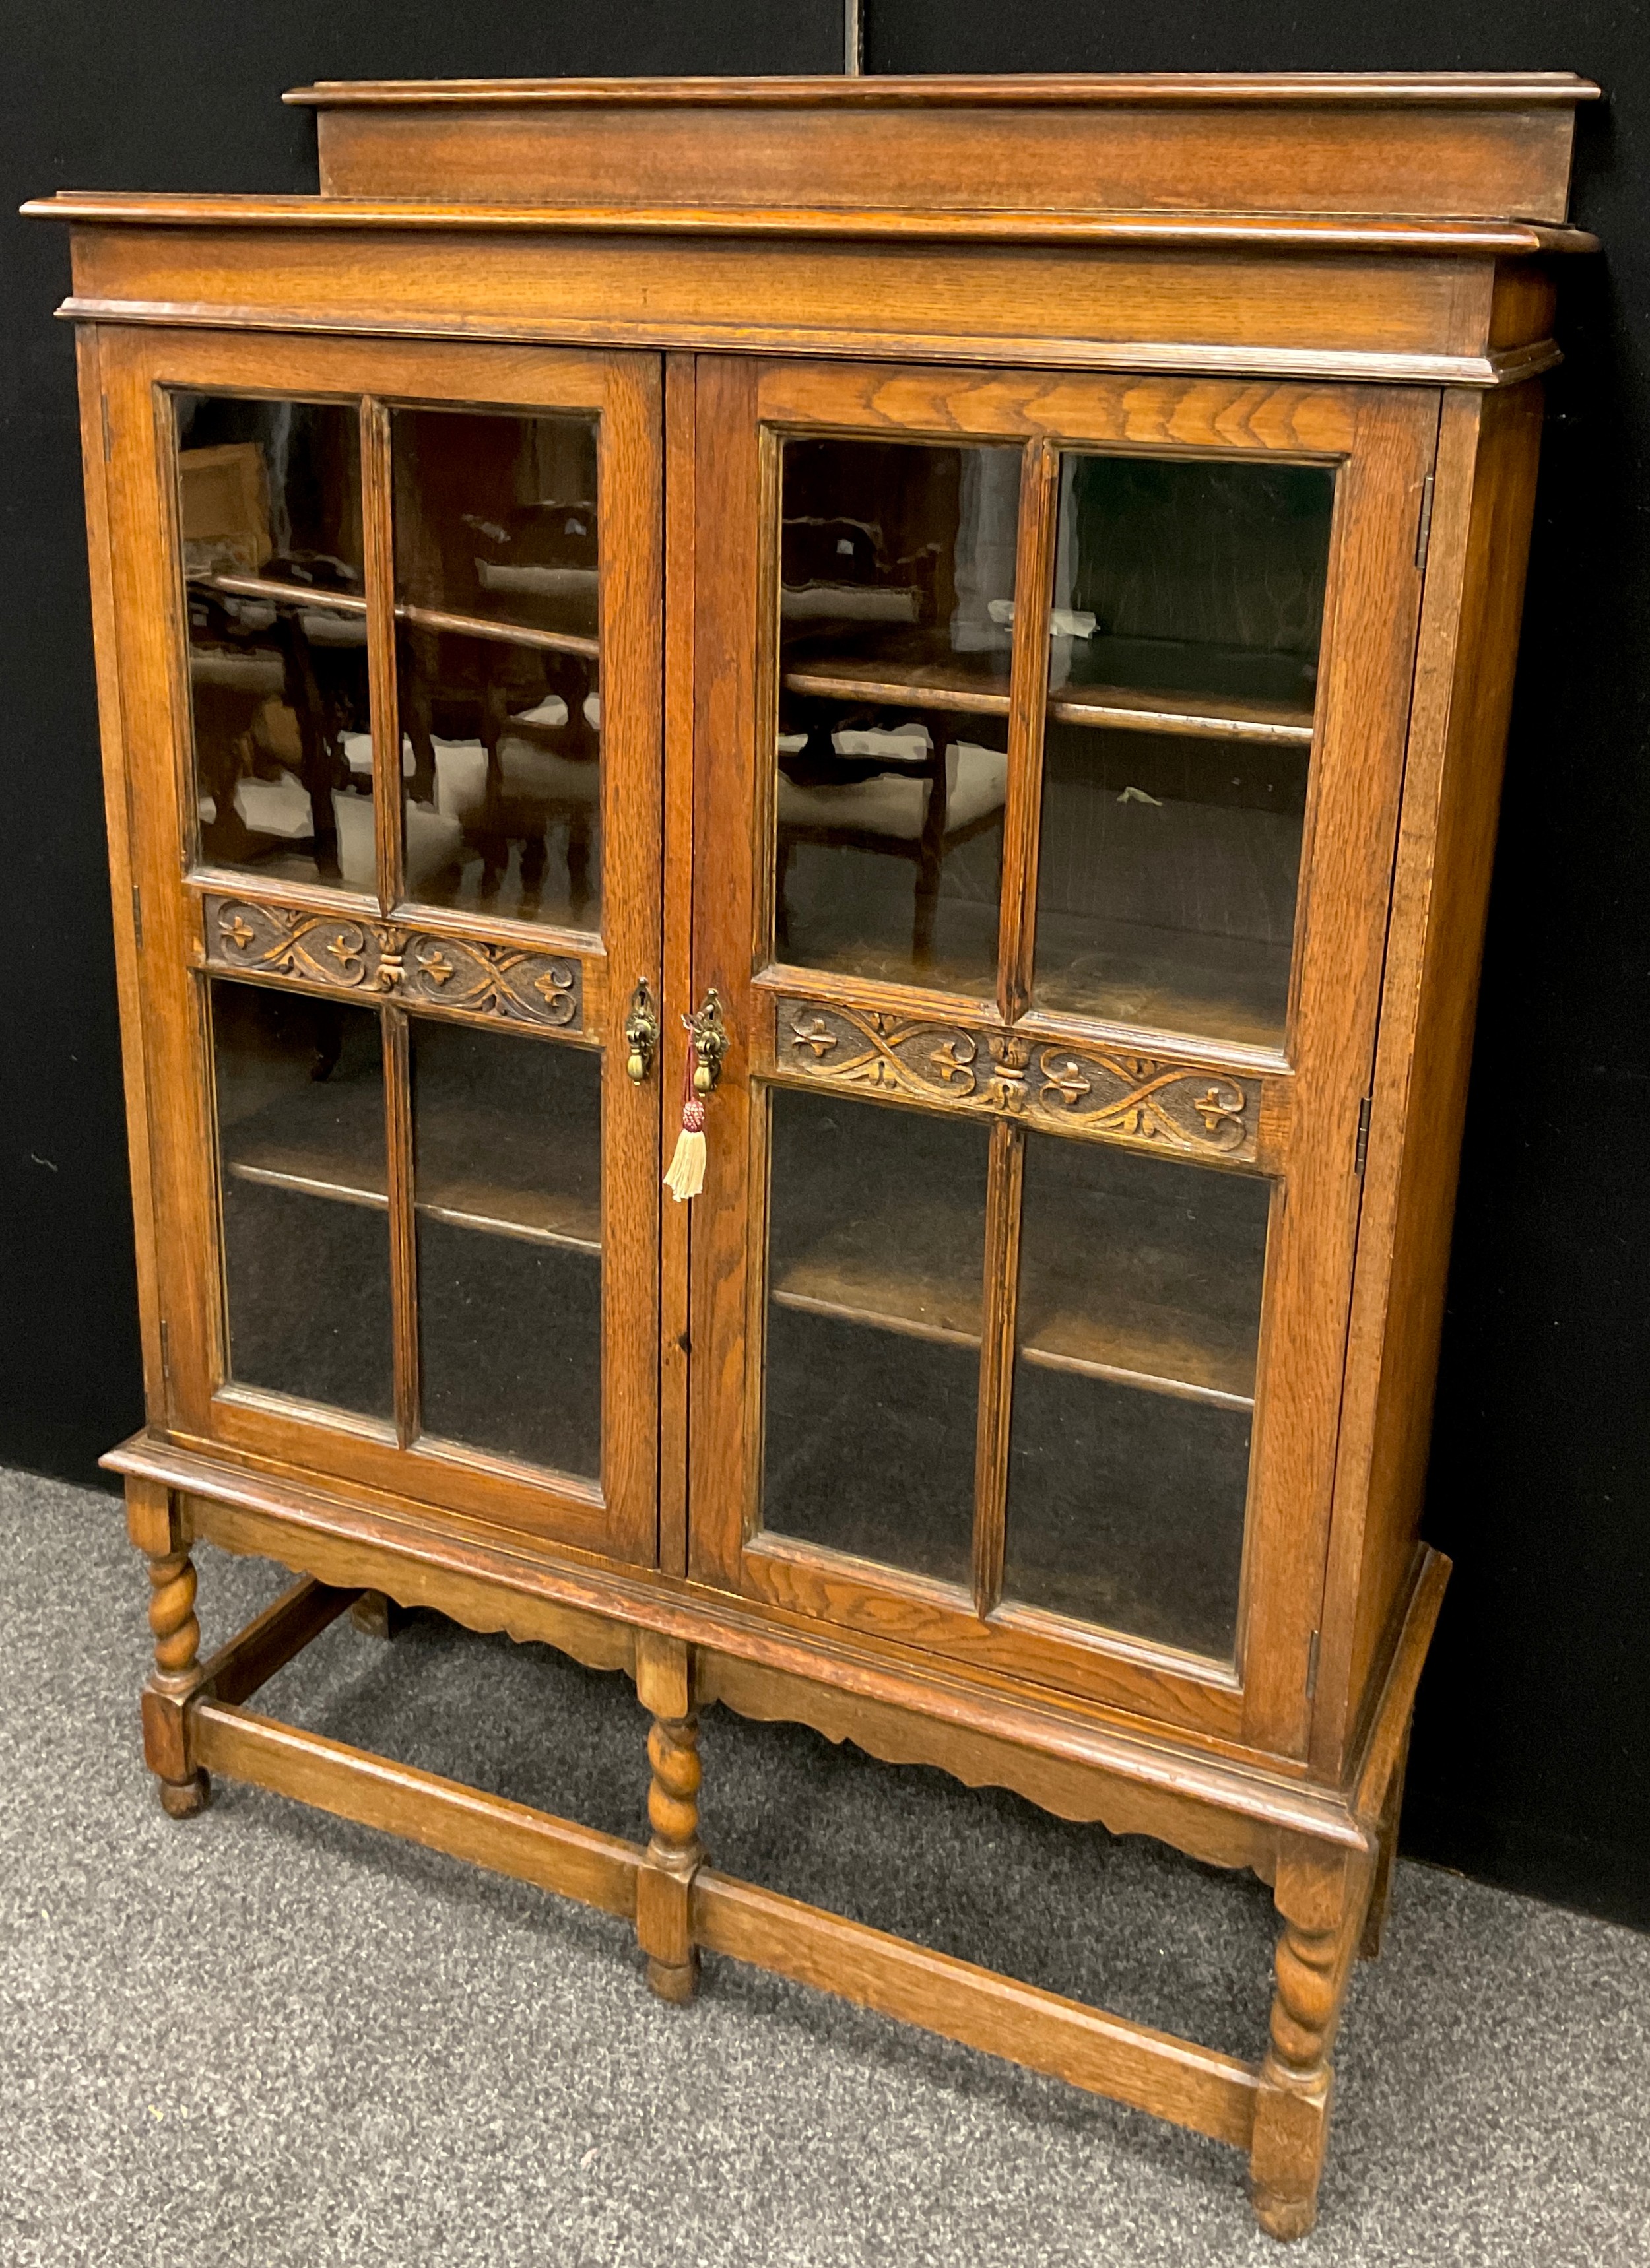 An Arts and Crafts style oak cabinet, 149.5cm high x 106.5cm wide x 34.5cm deep, early 20th century.